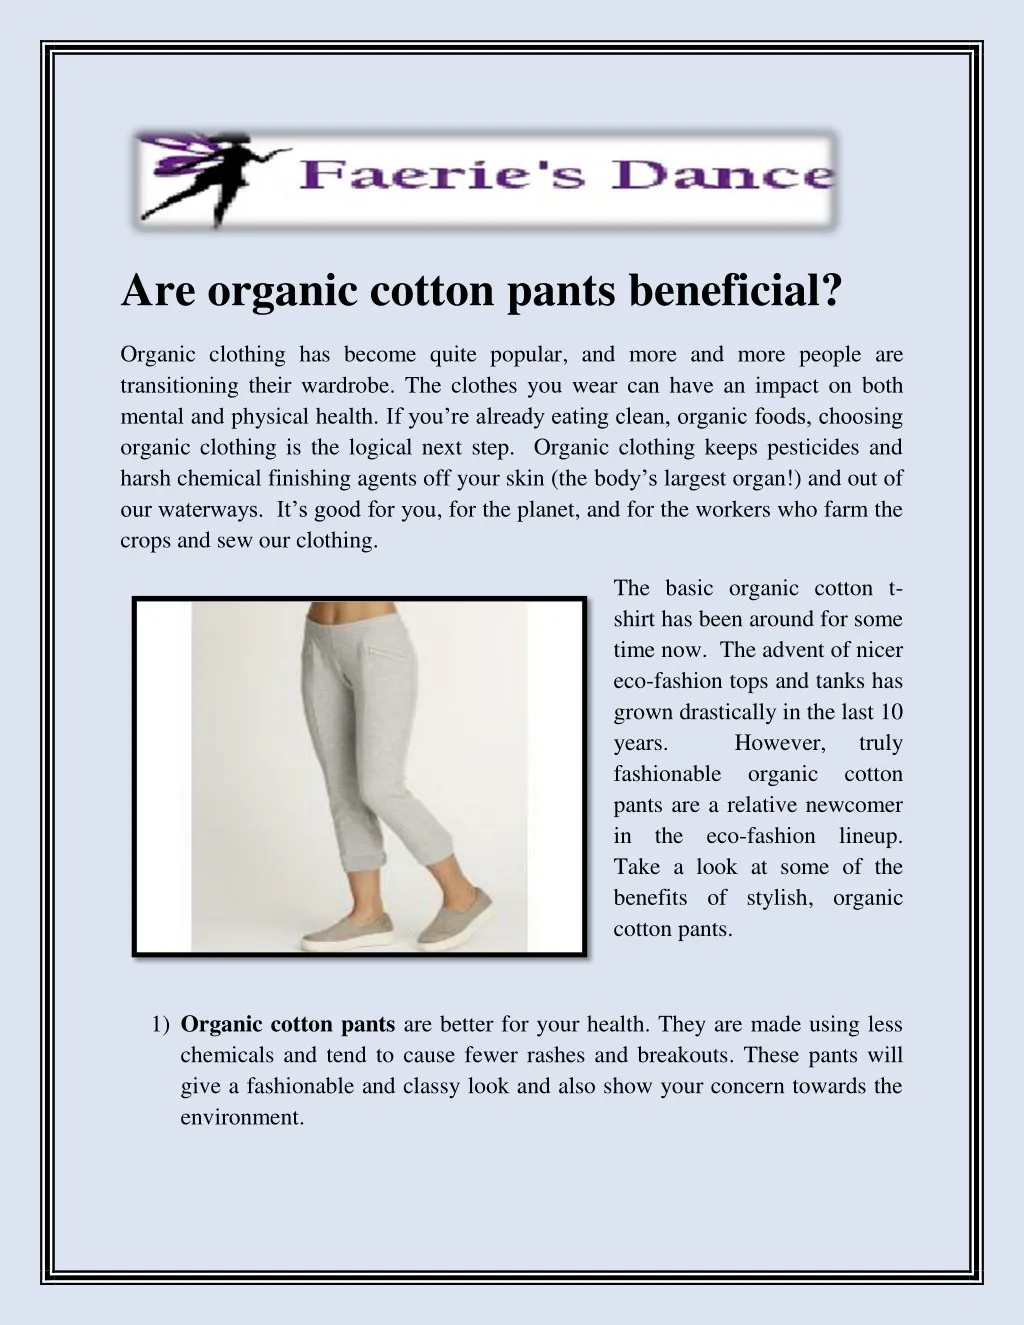 are organic cotton pants beneficial